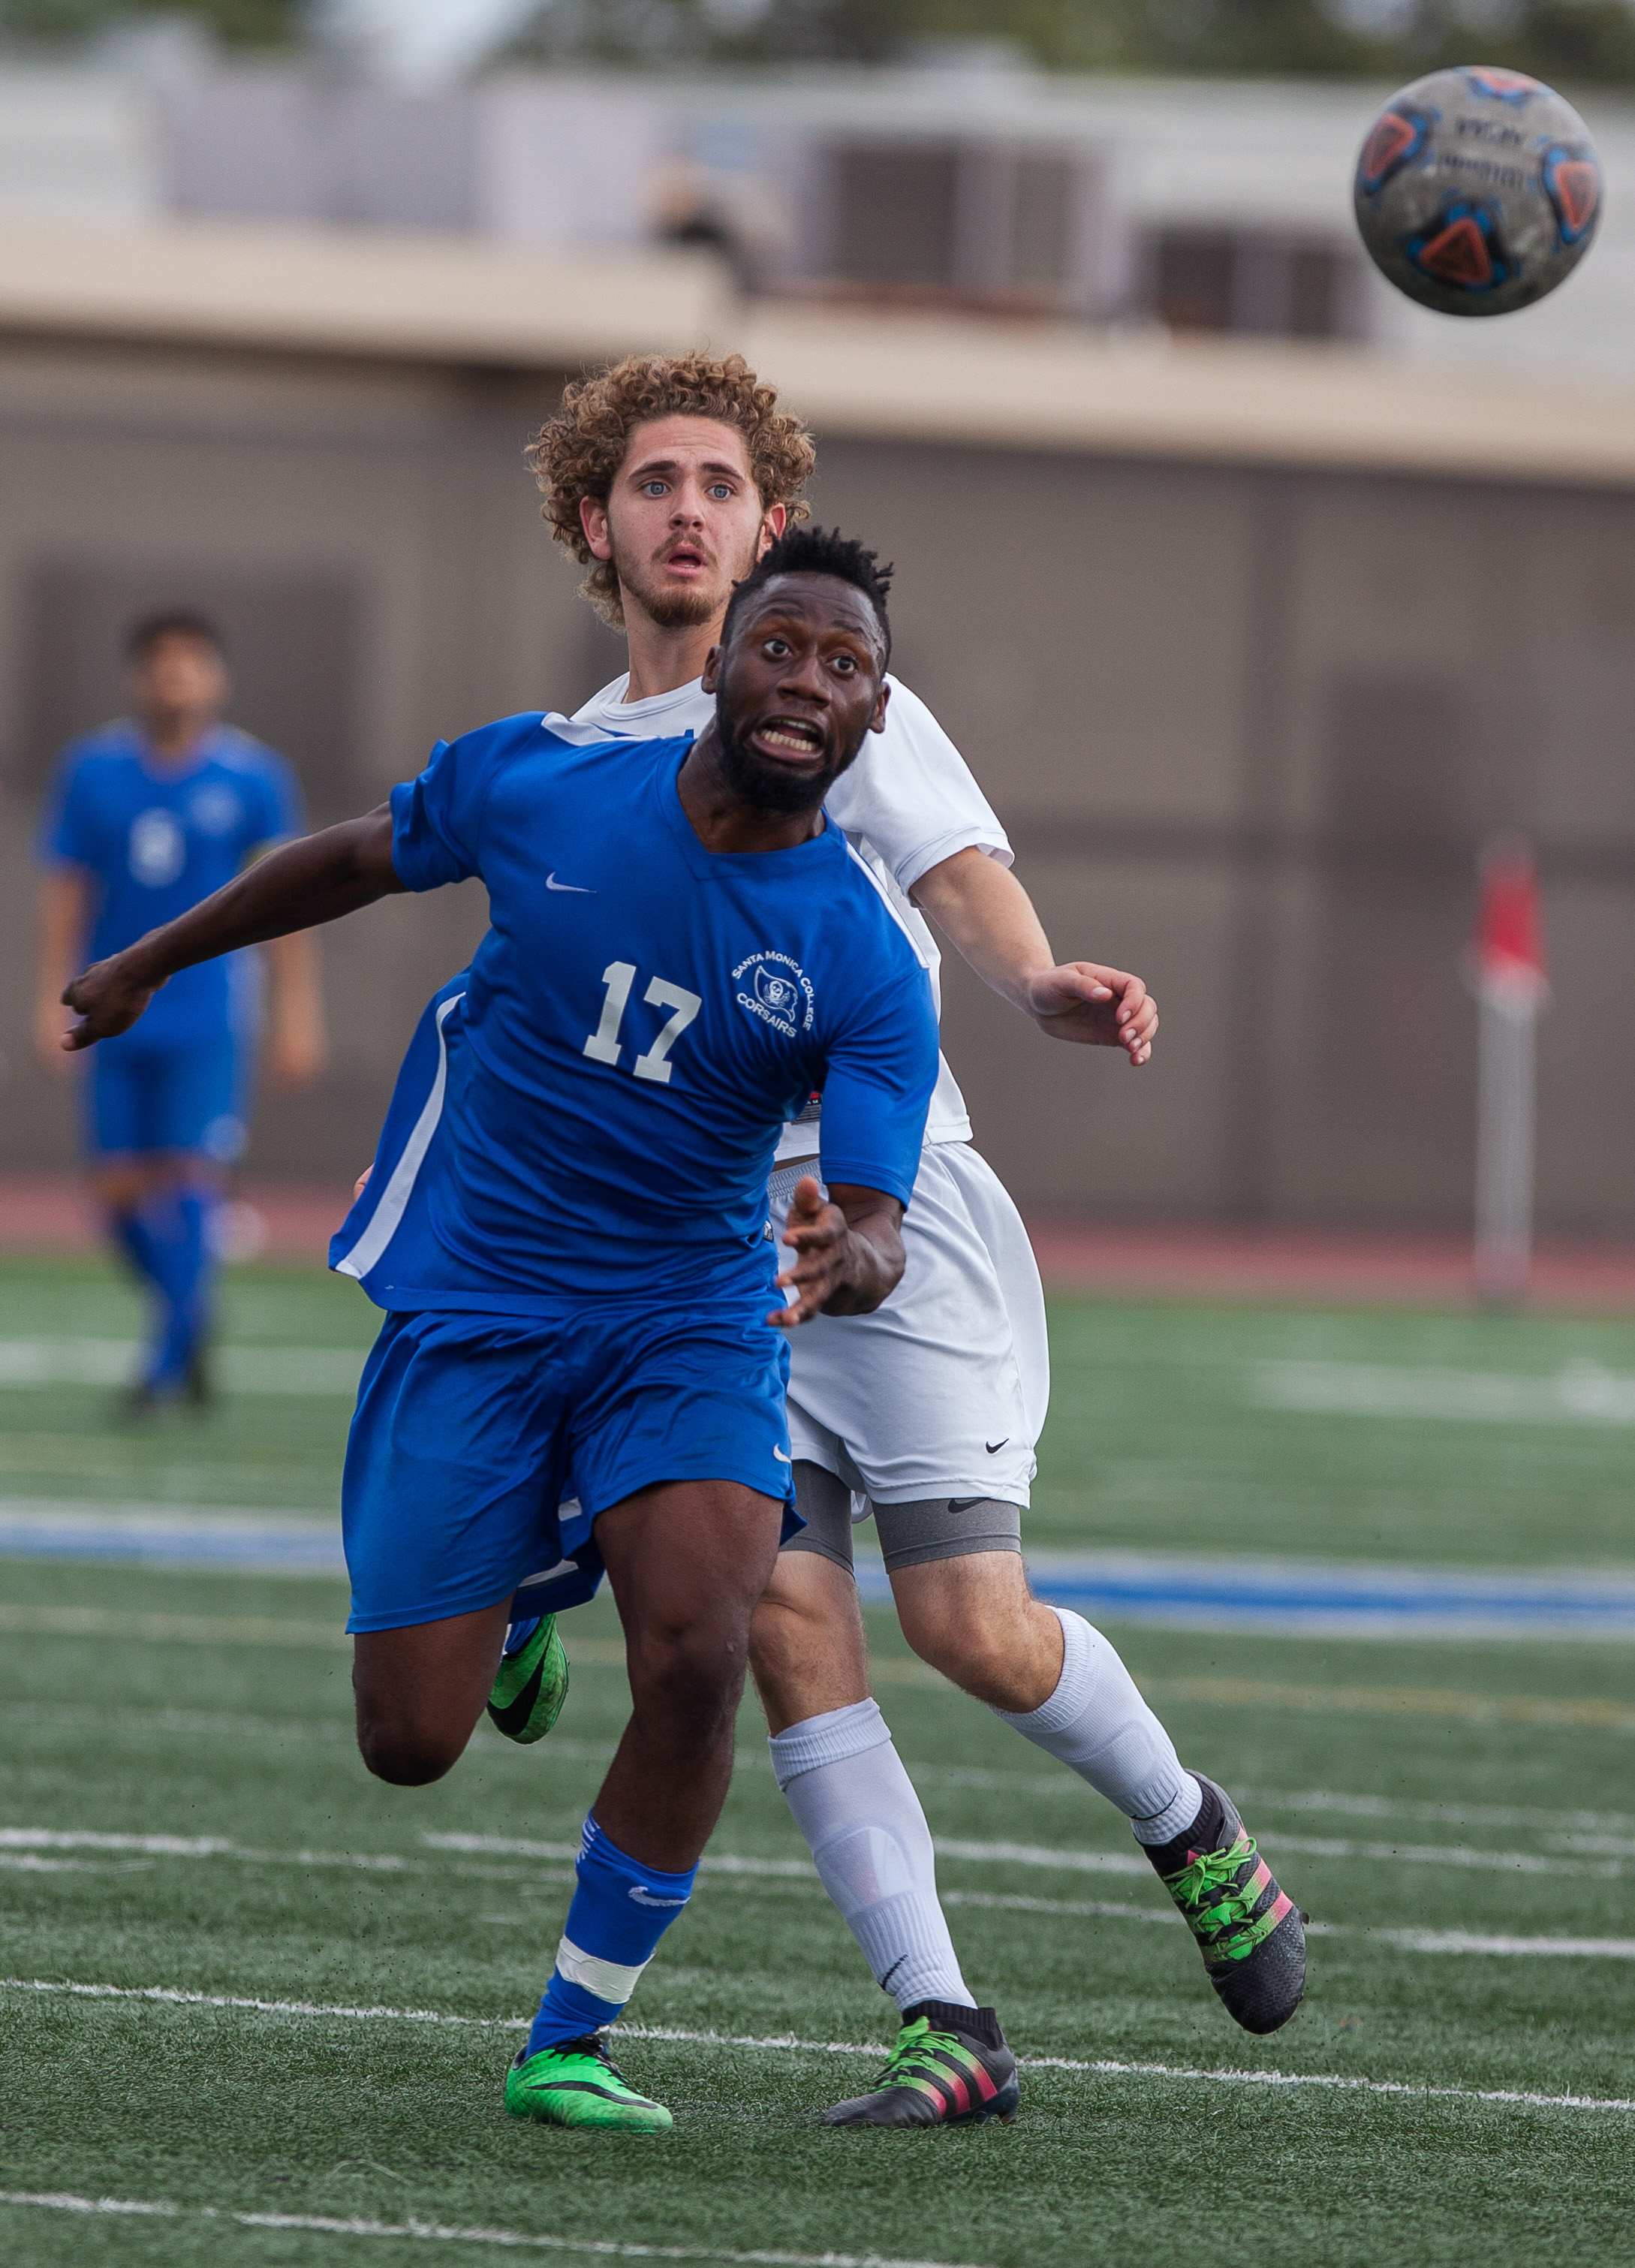  Cyrille Njomo (17) of the Santa Monica College try to catch the ball from Angel Gallo (9) of the Allan Hancock College. The game ended 1-1 resulting in a tie. The game was held at the Corsair Stadium at the Santa Monica College Main Campus in Santa 